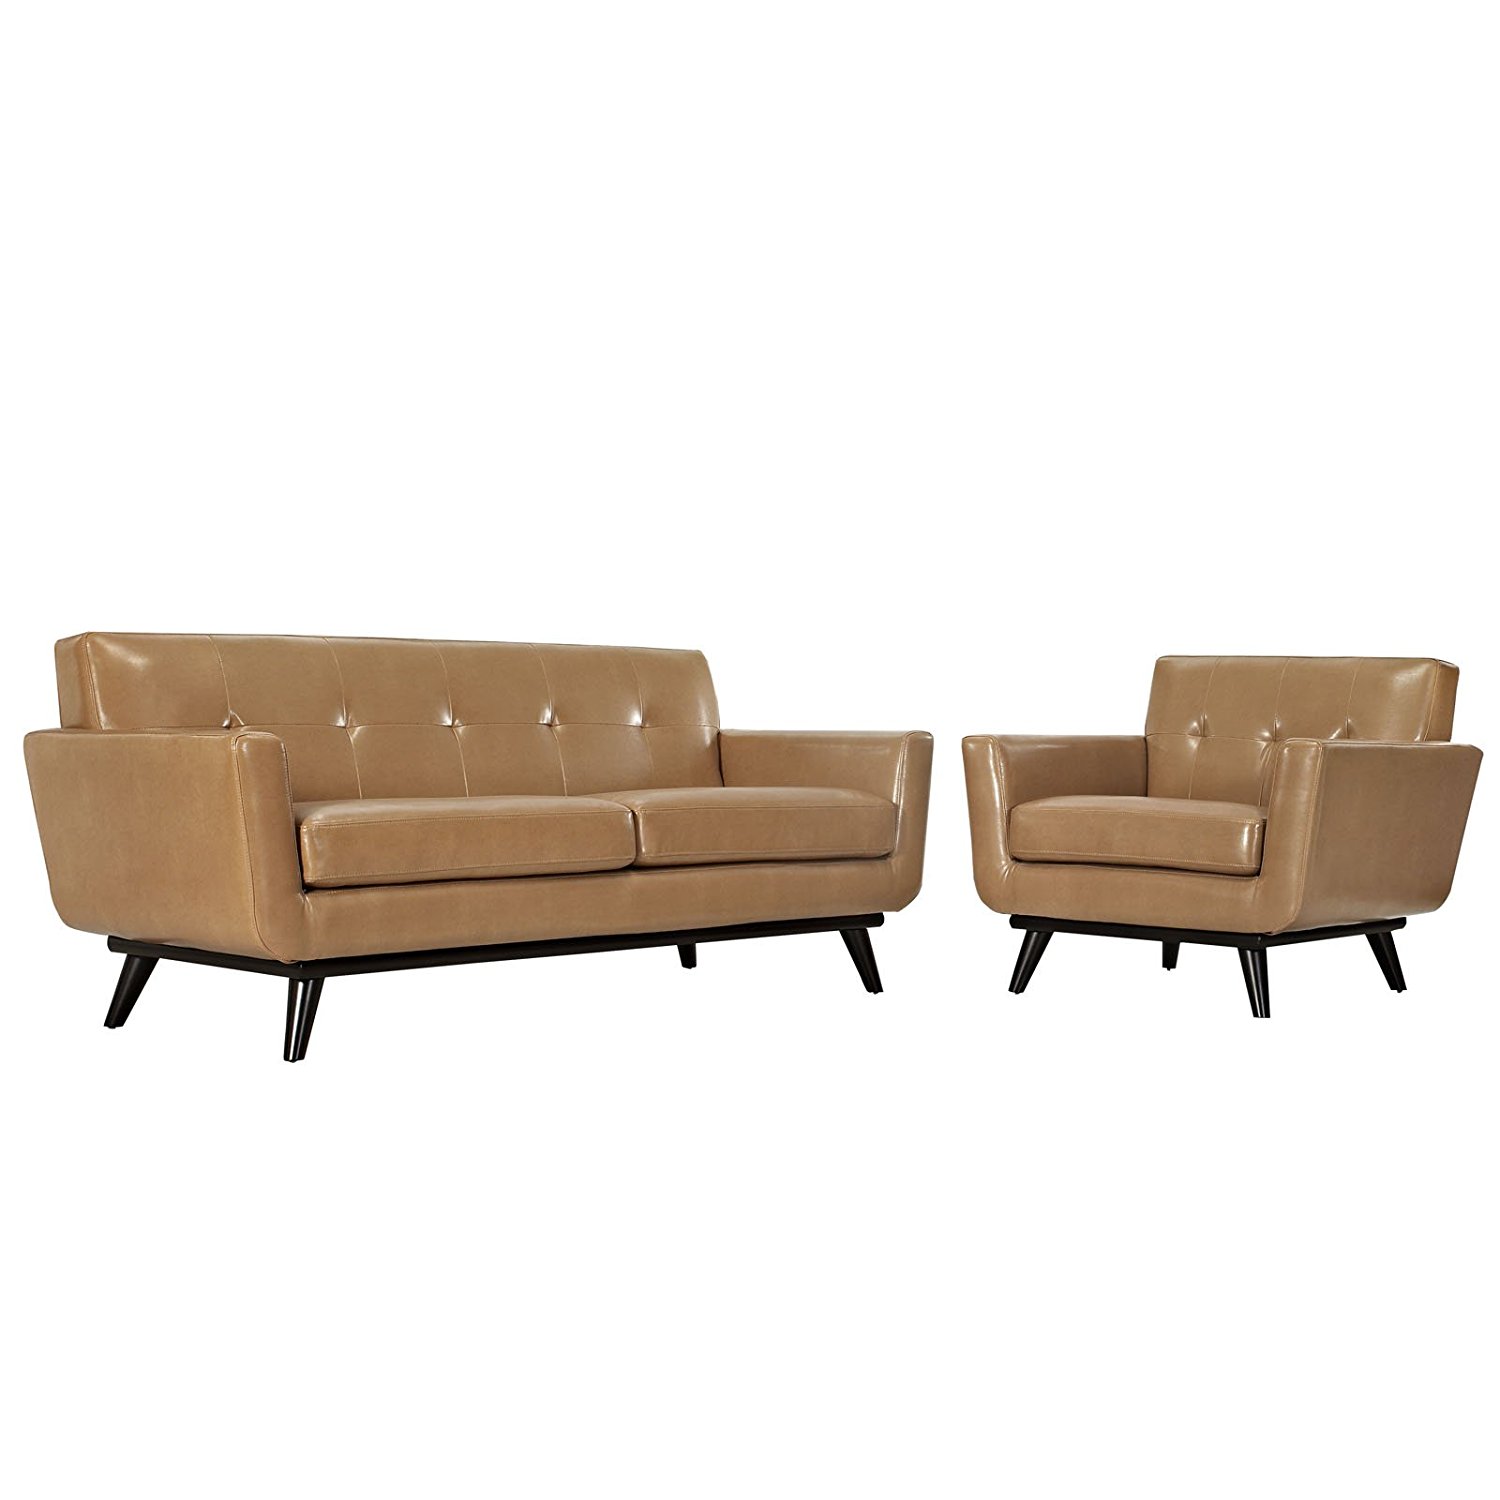 Modern Urban Contemporary 2 pcs Leather Living Room Set, Tan Leather